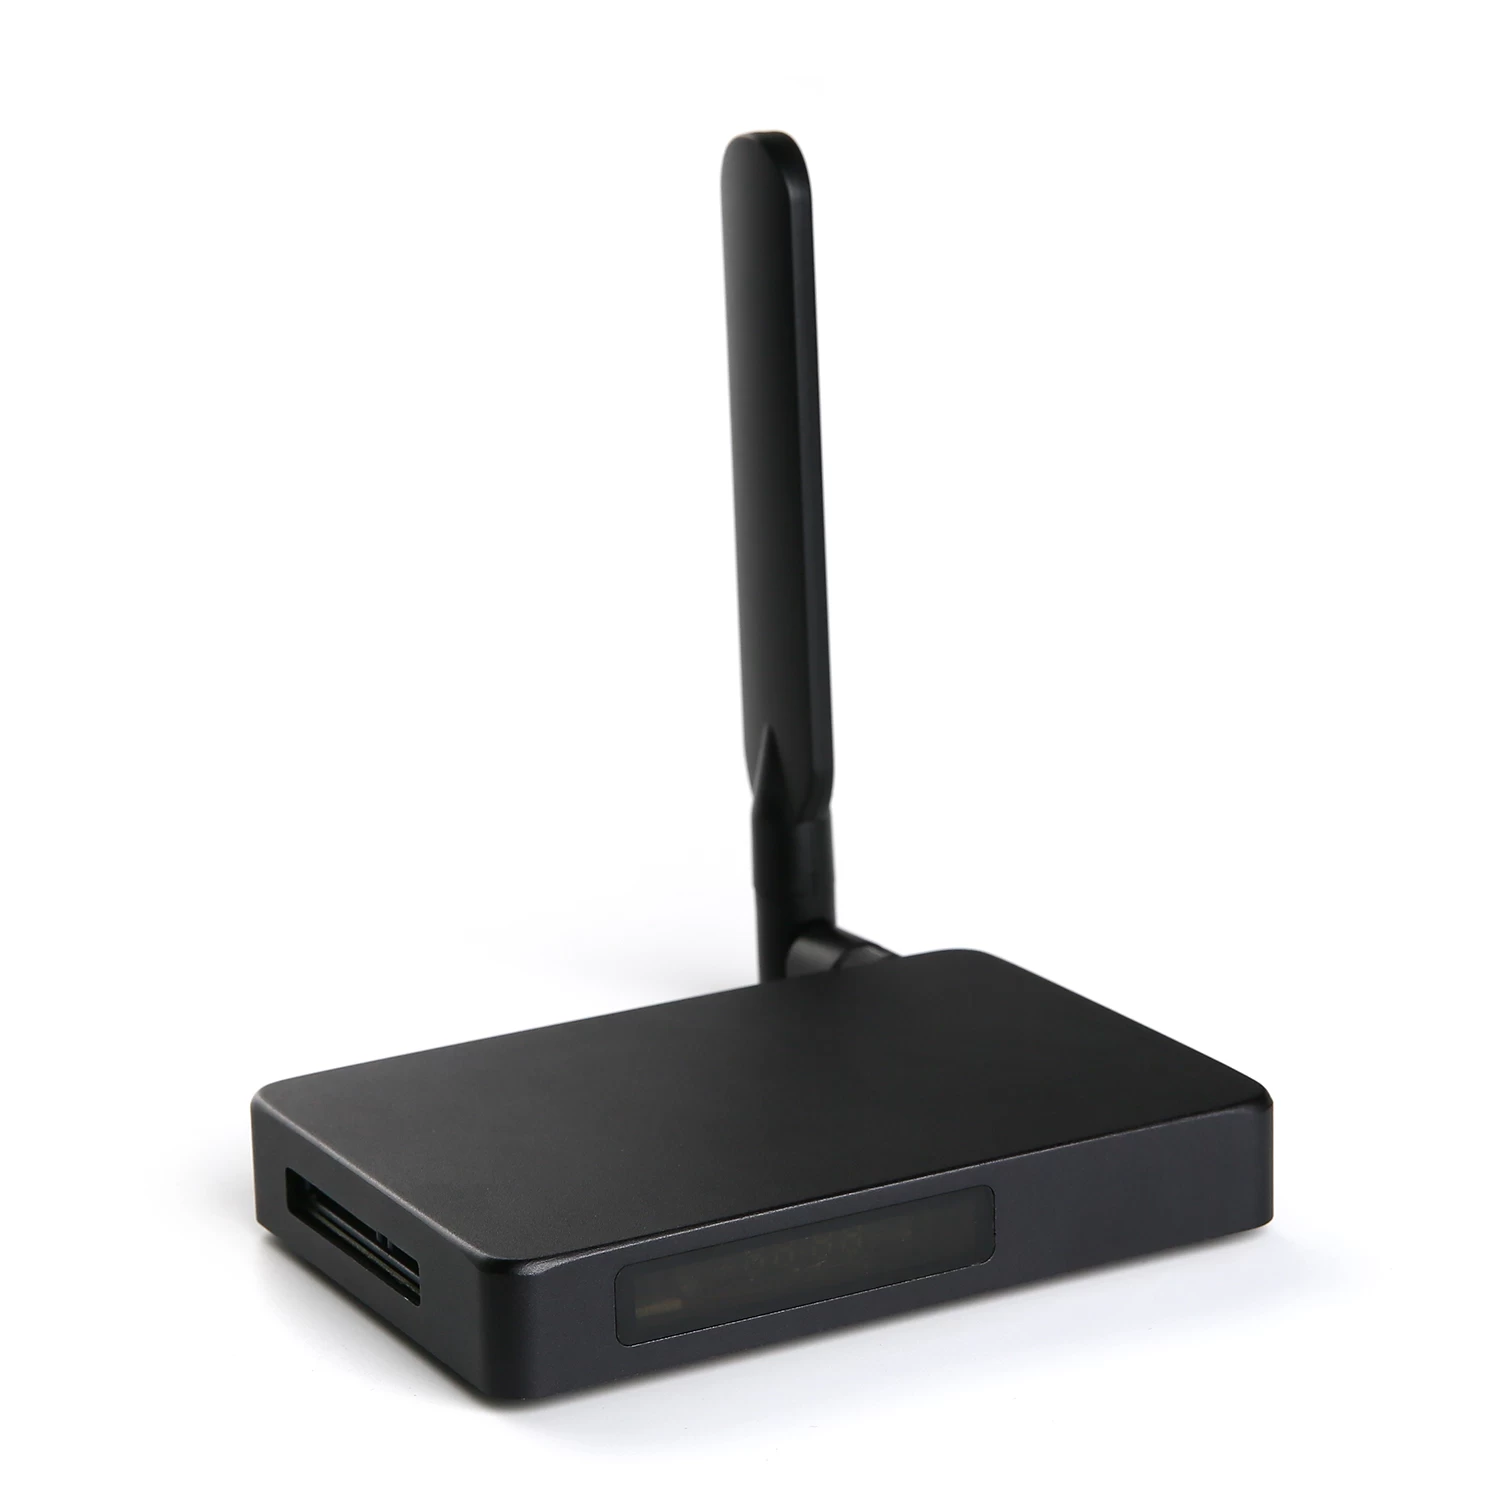 Android Tv Box solution provider, Android TV Box Custom, Android TV Box supported LED/LCD